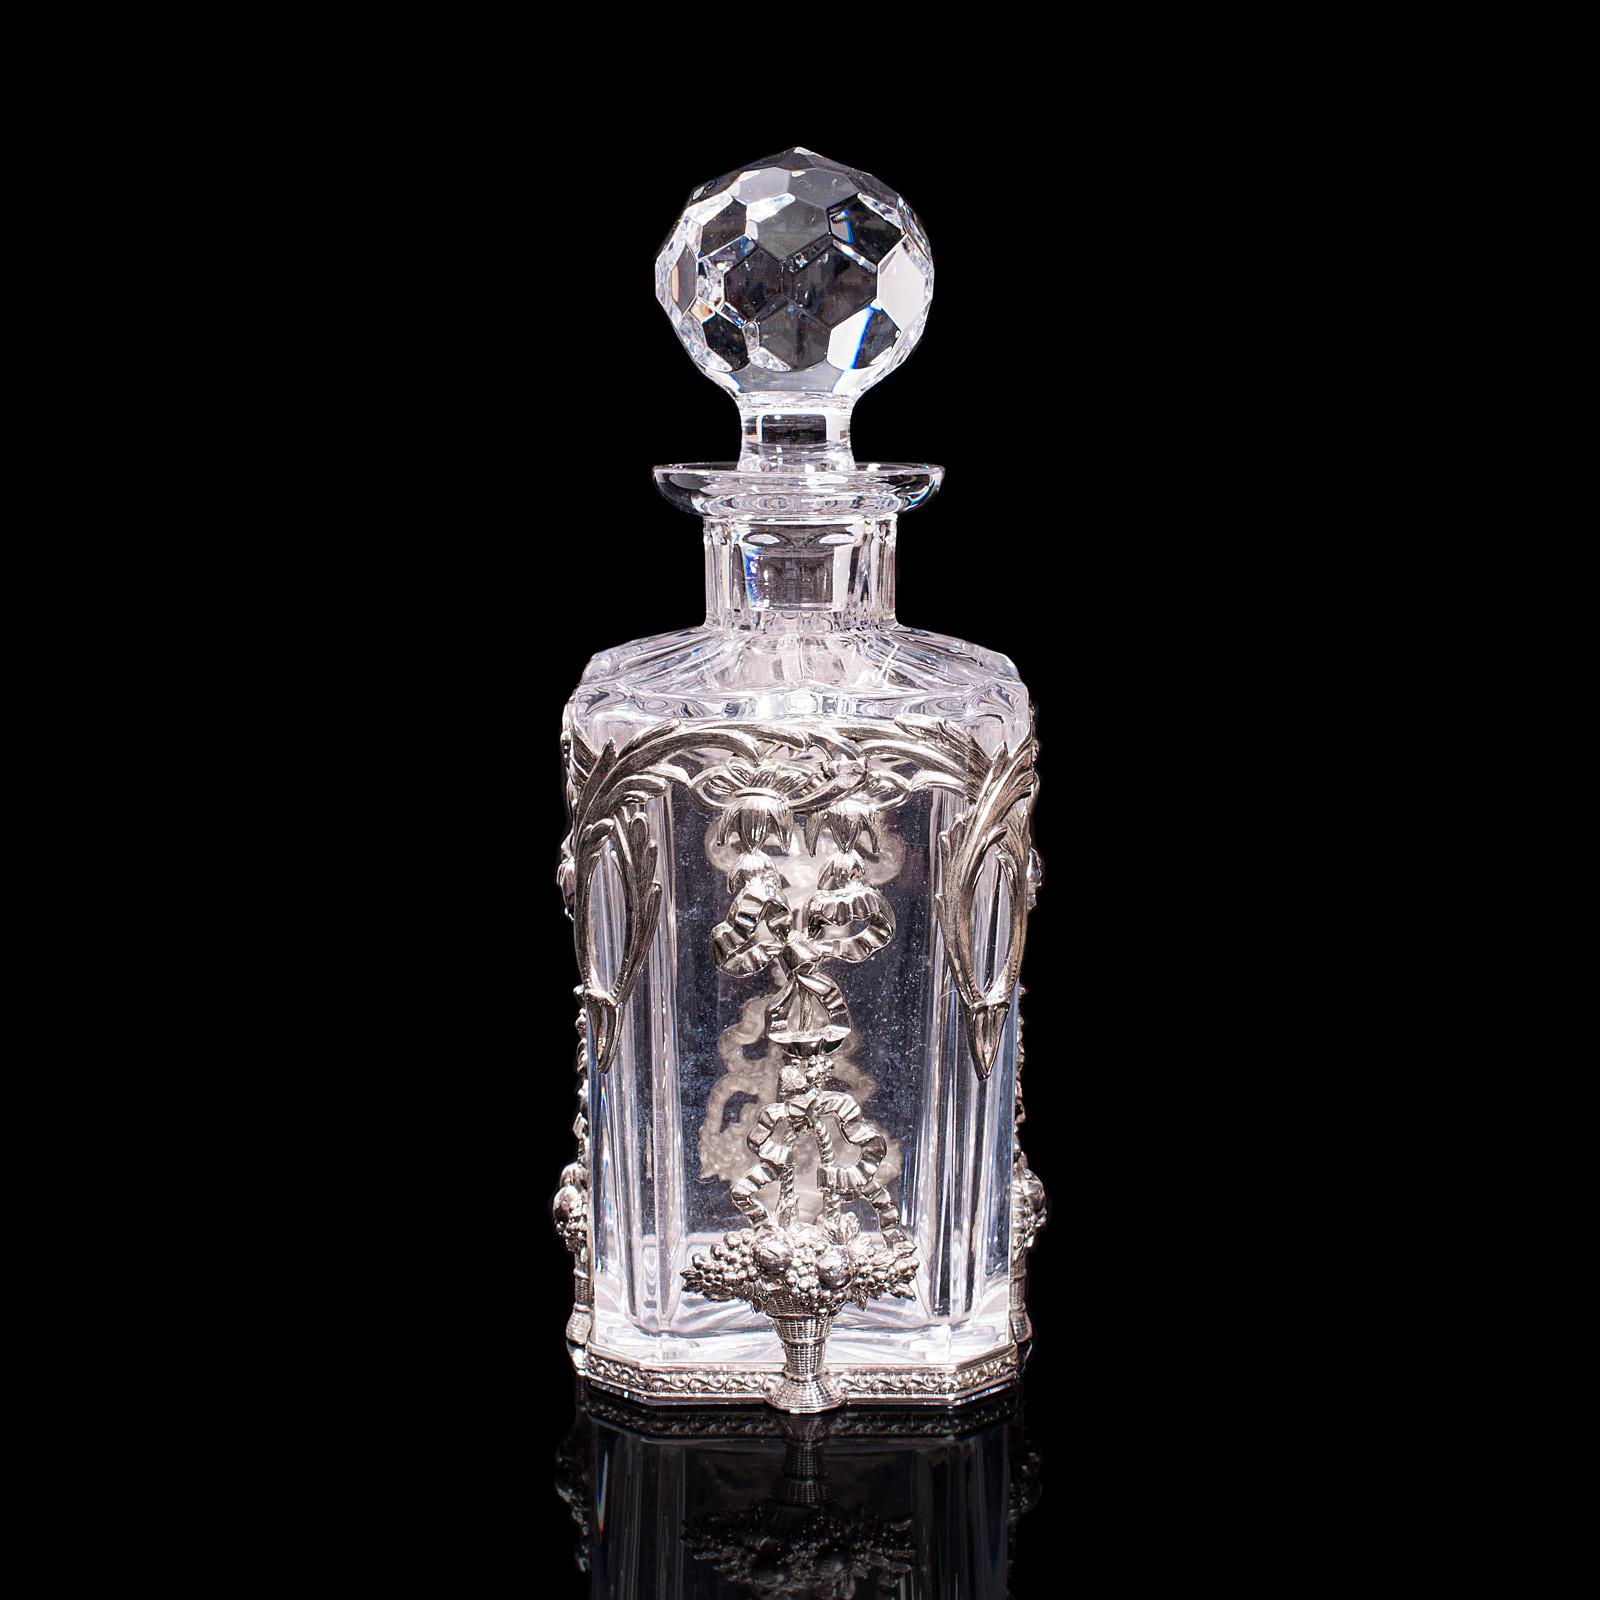 This is a vintage whiskey decanter. A Portuguese, glass spirit vessel with sterling silver filigree decoration, dating to the late 20th century, circa 1970.

Attractive decorative vessel for your finest spirits
Displaying a desirable aged patina